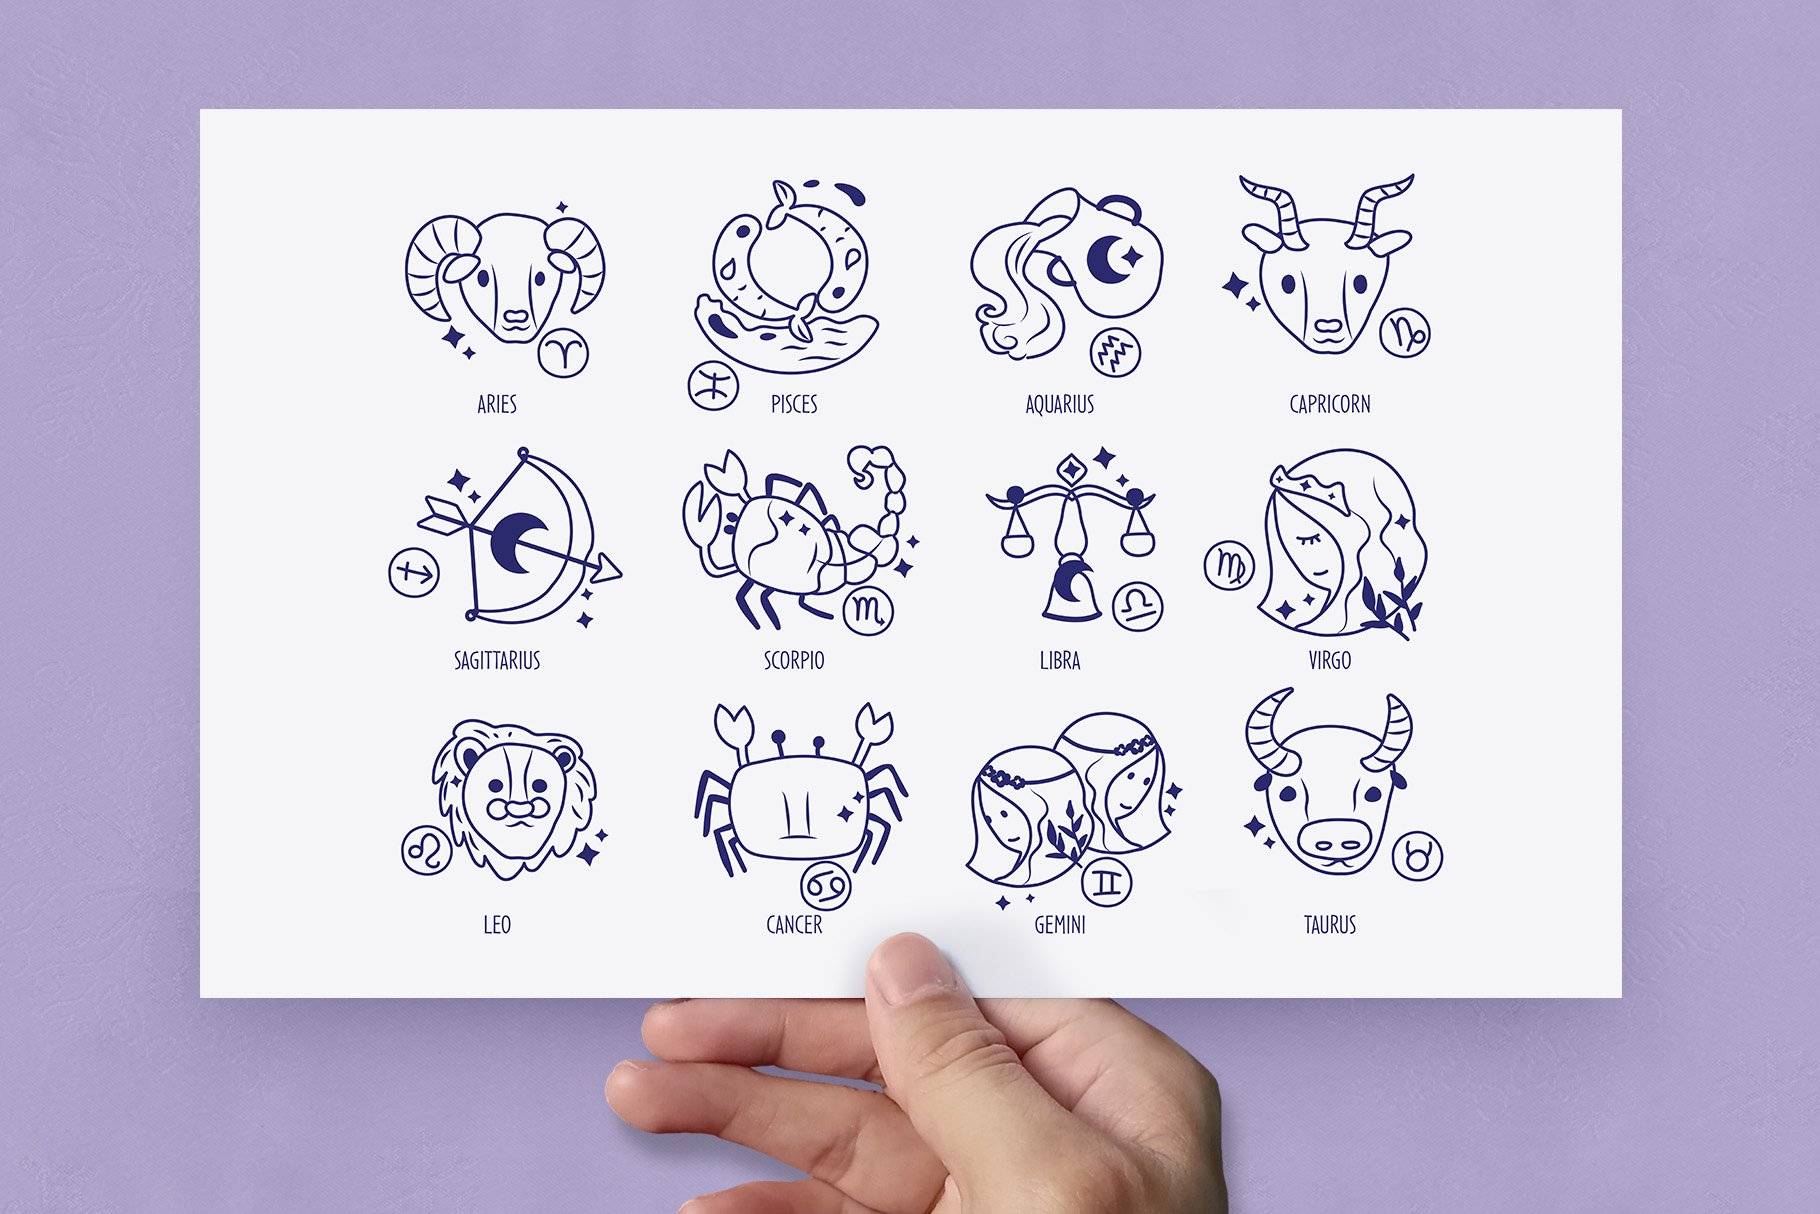 All outline zodiac signs with the creative and simple design.